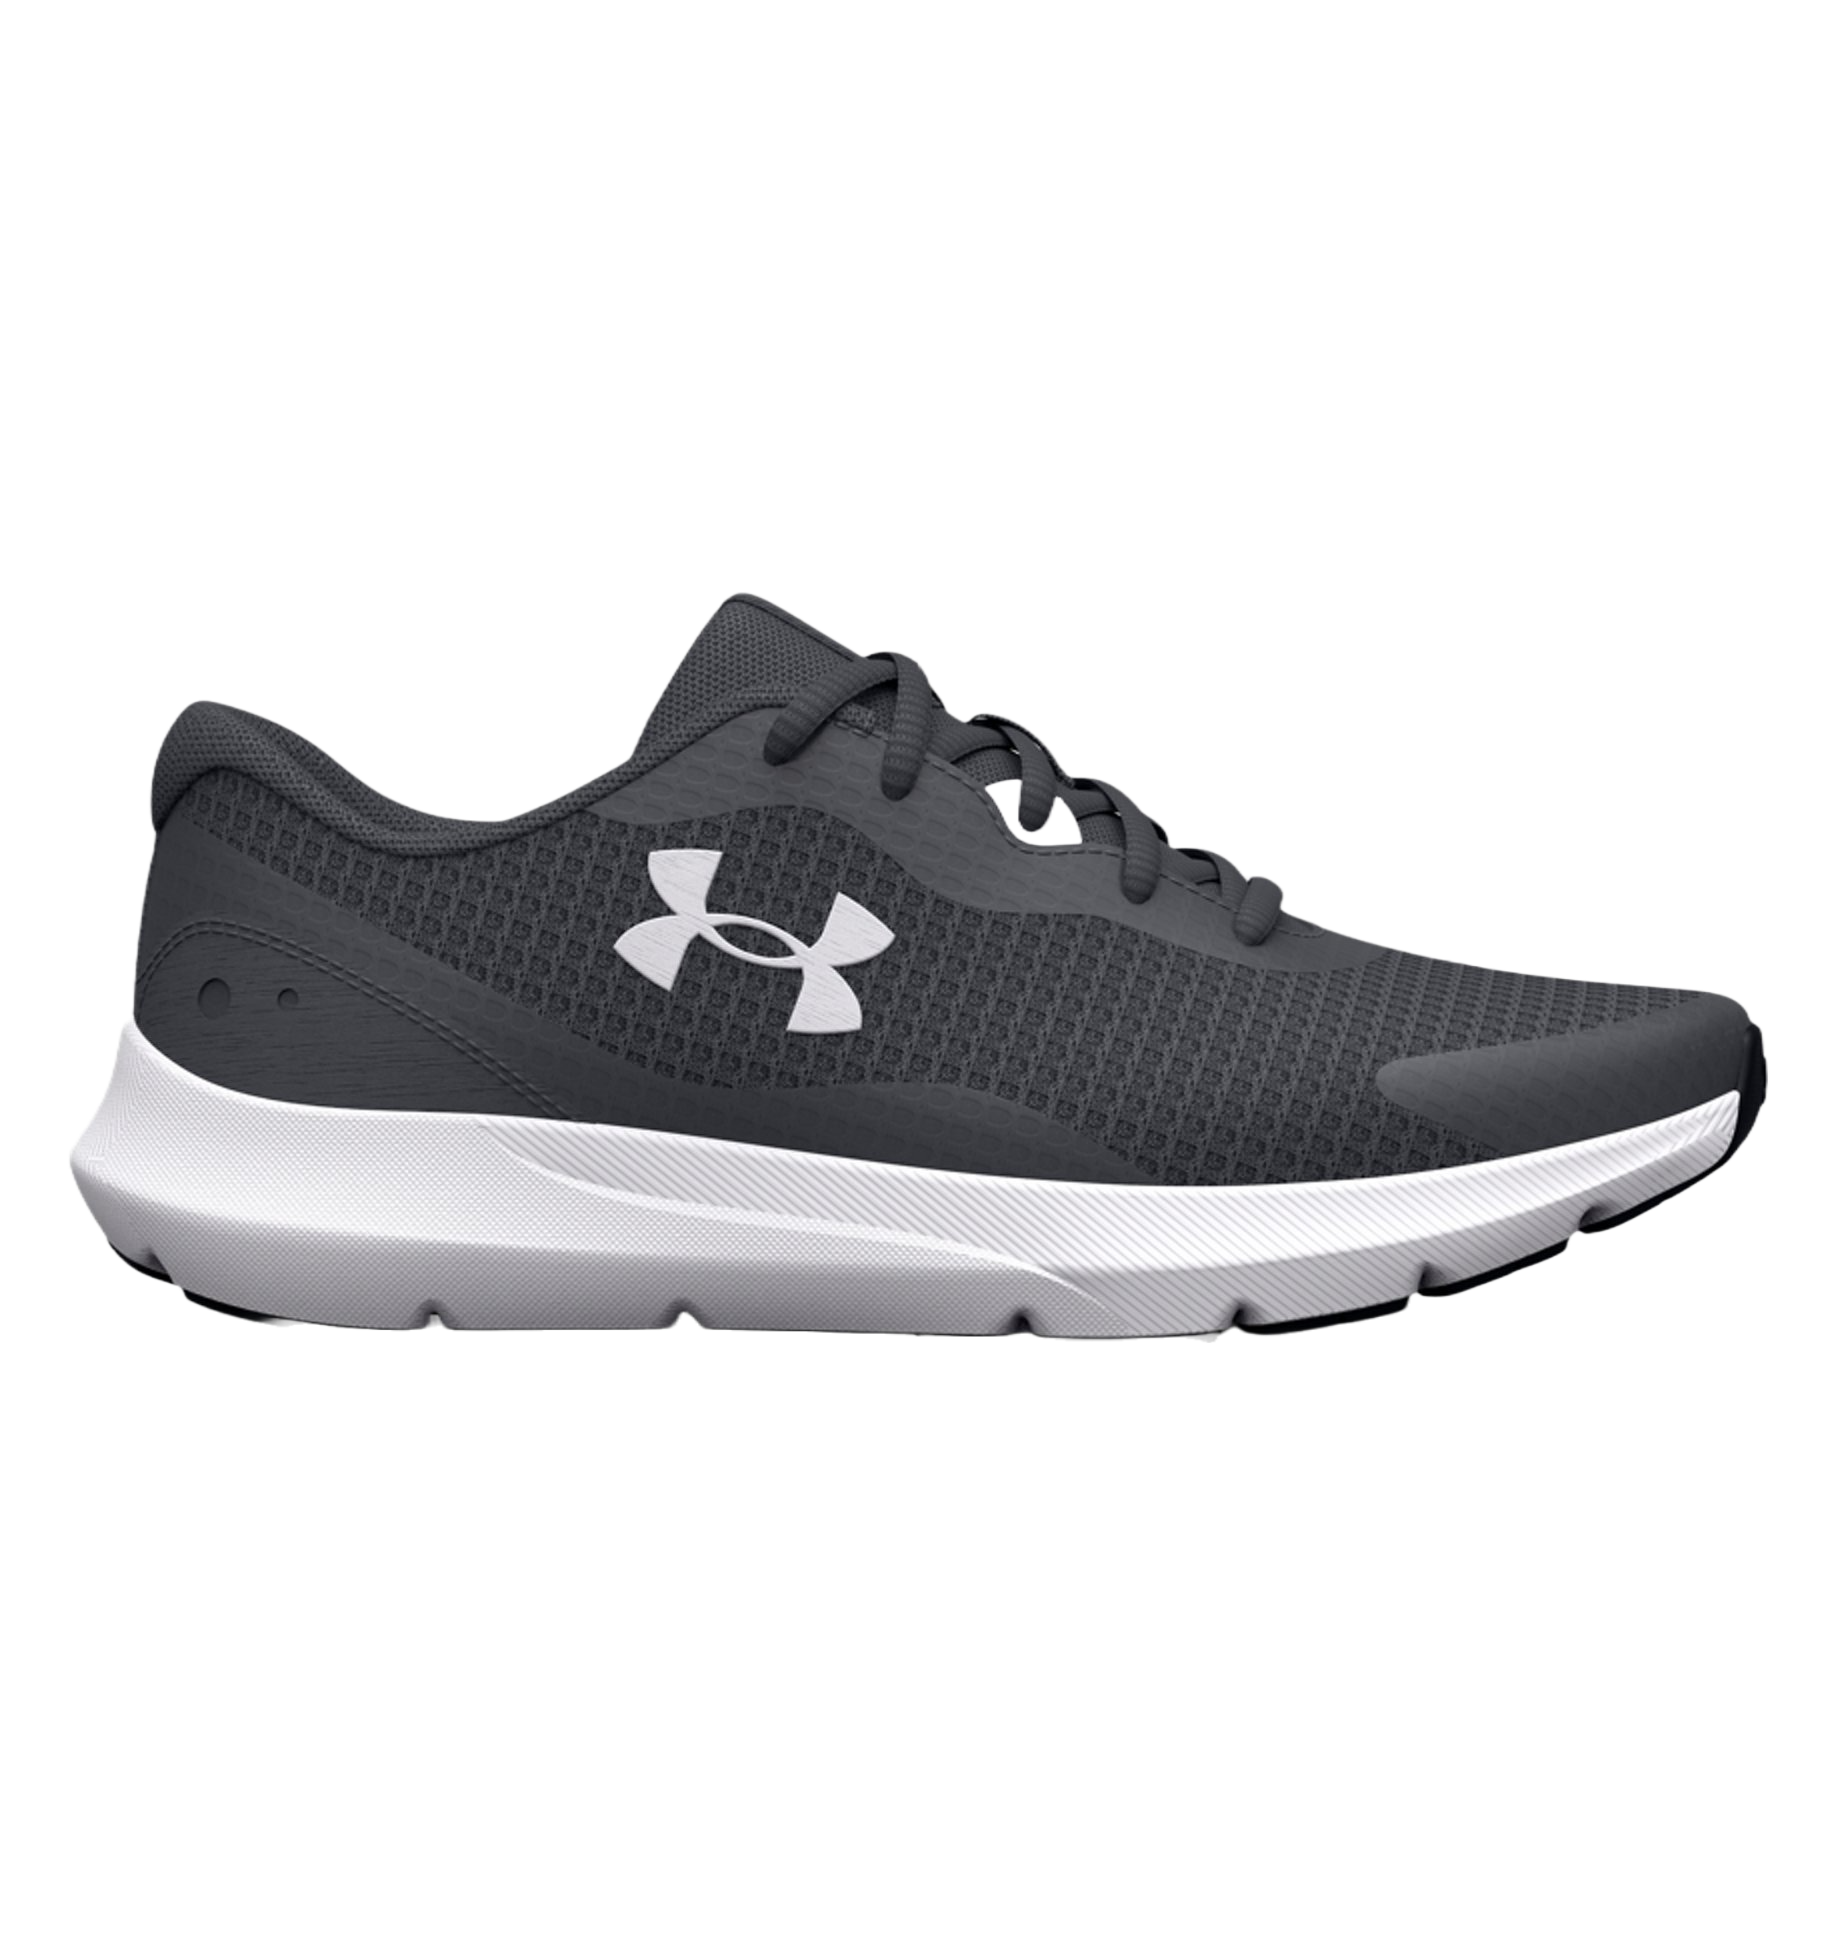 Under Armour Surge 3 - Womens